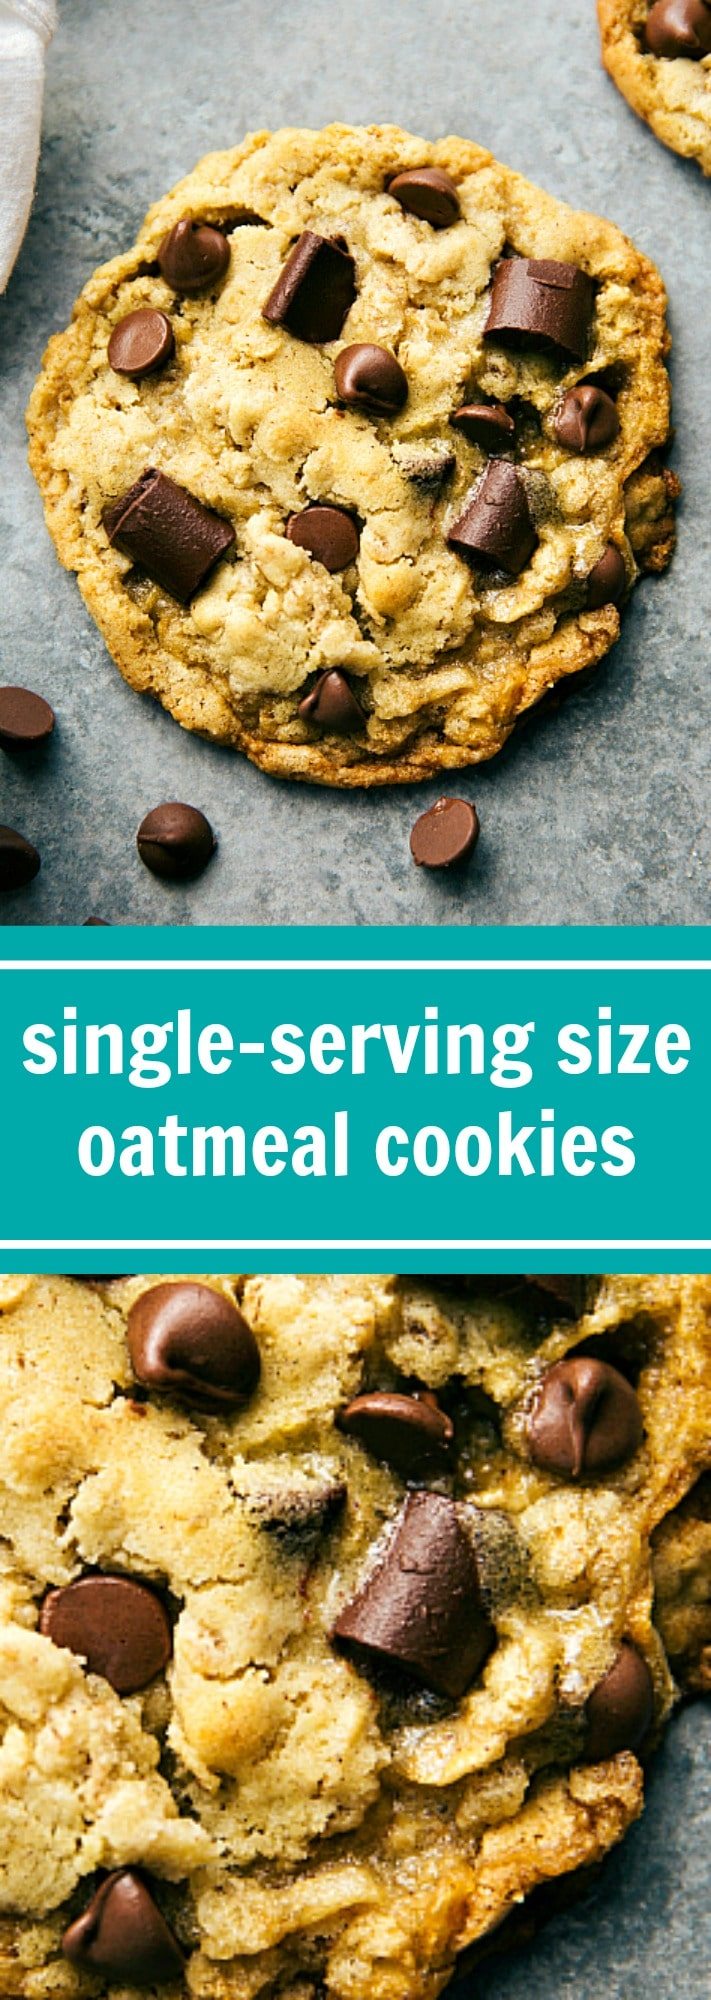 The BEST Single Serve Oatmeal Chocolate Chip Cookies. Reader said, These are the best oatmeal chocolate chip cookies I’ve ever had